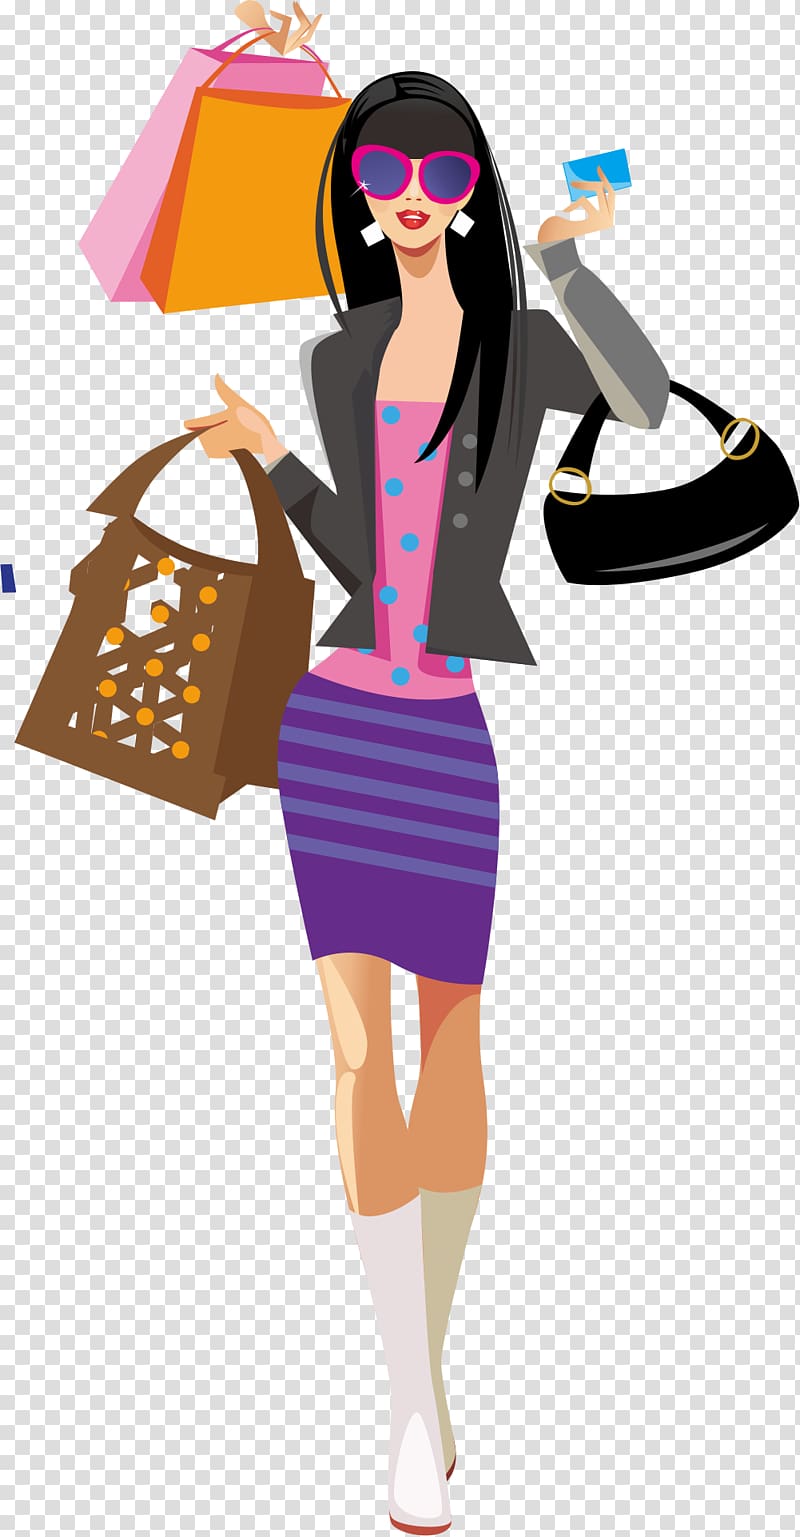 Shopping illustration, A woman carrying a shopping bag transparent  background PNG clipart | HiClipart